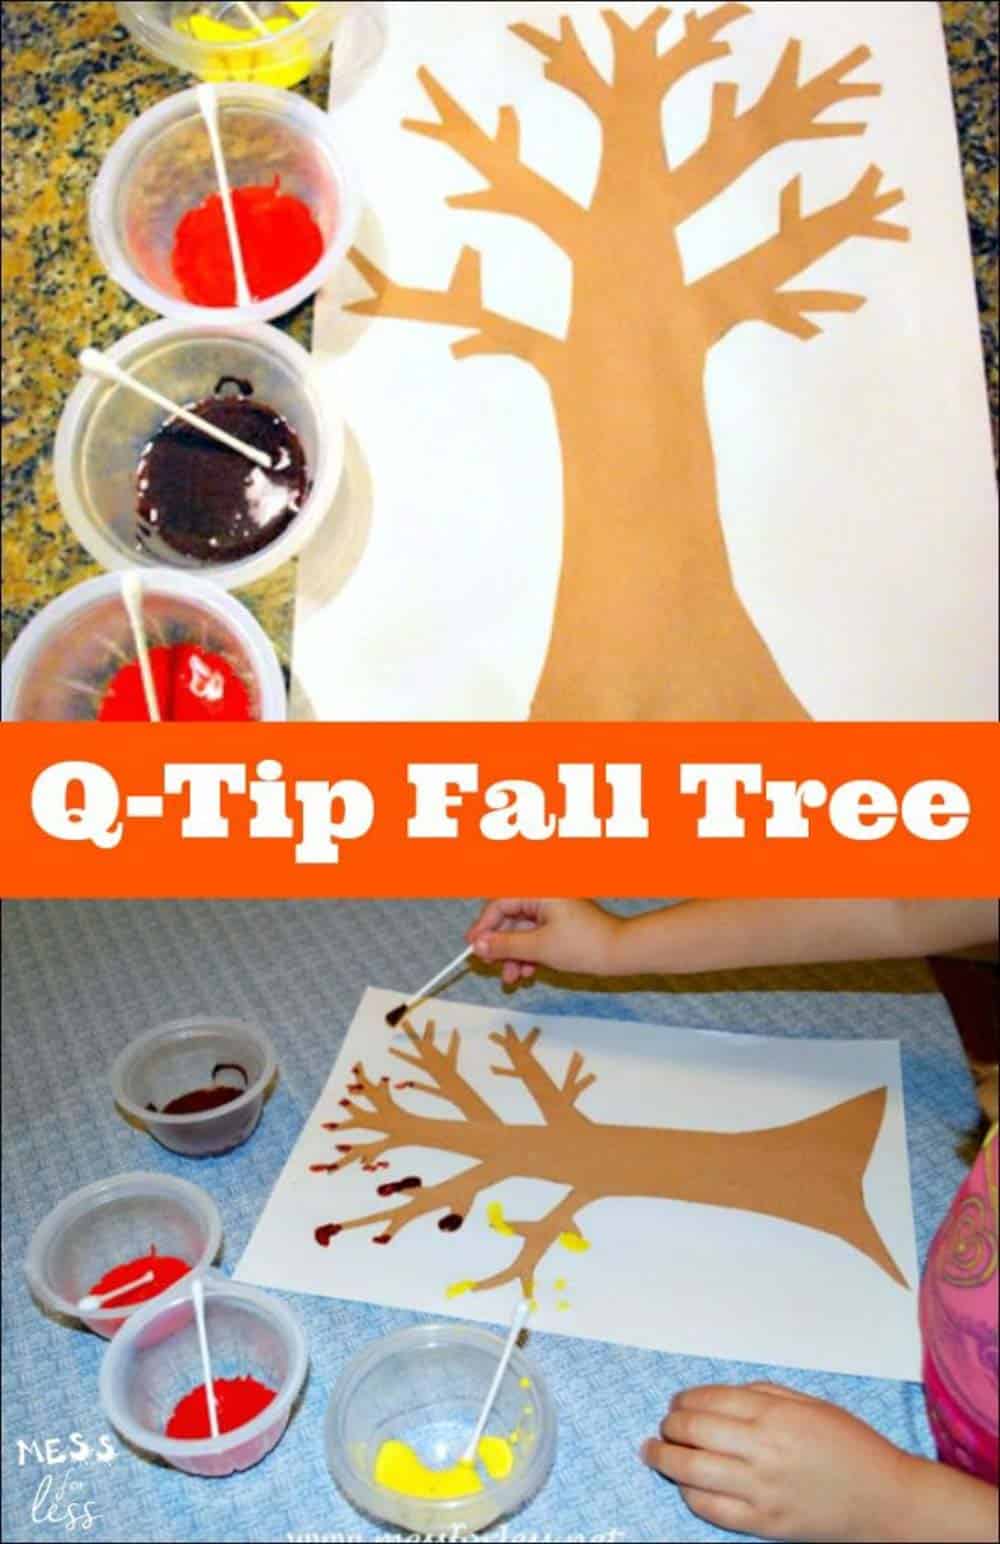 Contact Paper Crafts with Q-Tips - Mess for Less